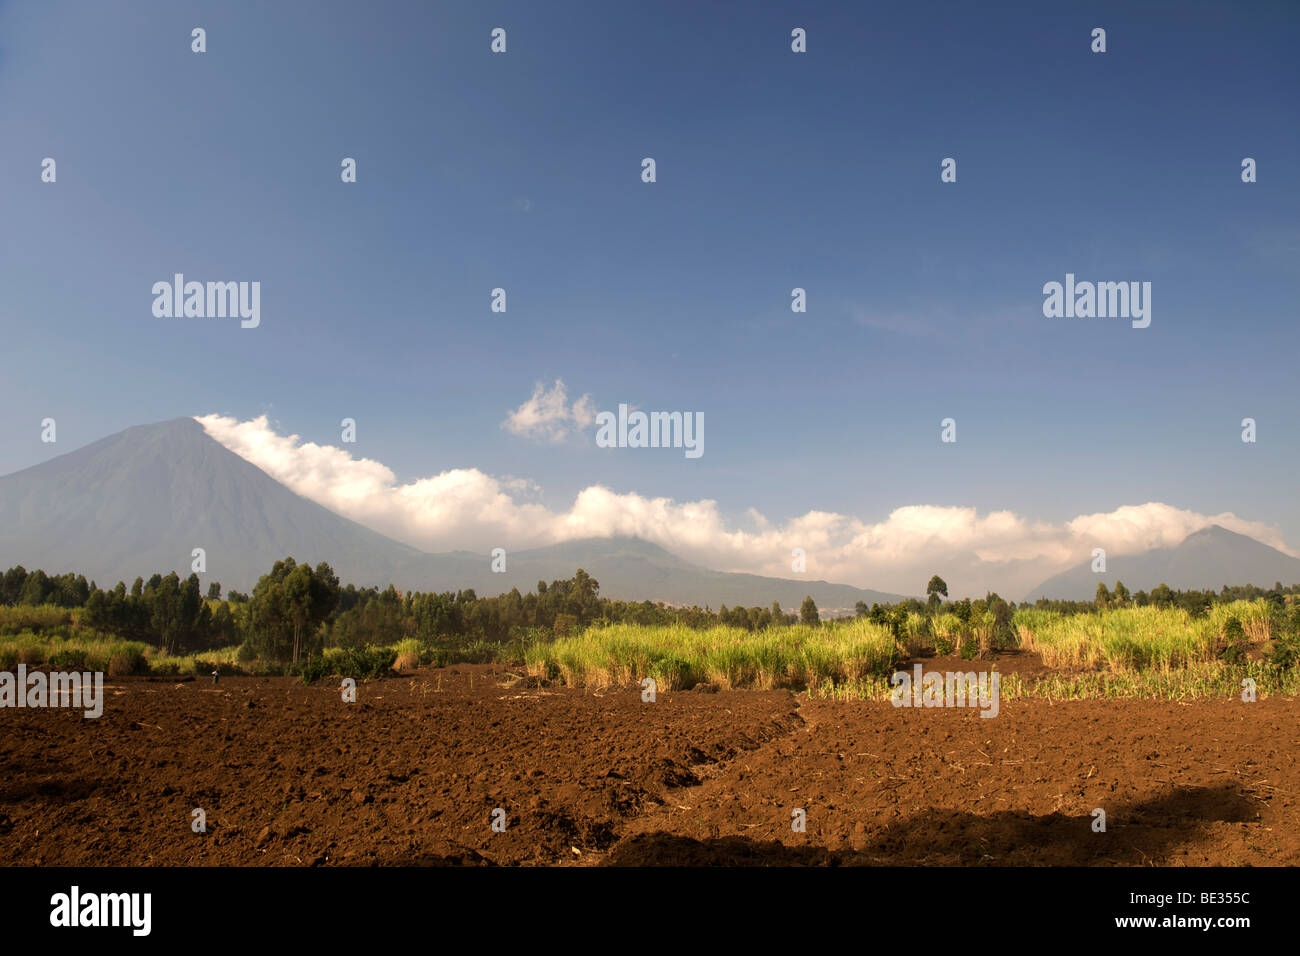 View of the three volcanic peaks in the Mgahinga Gorilla National Park in southern Uganda. Stock Photo